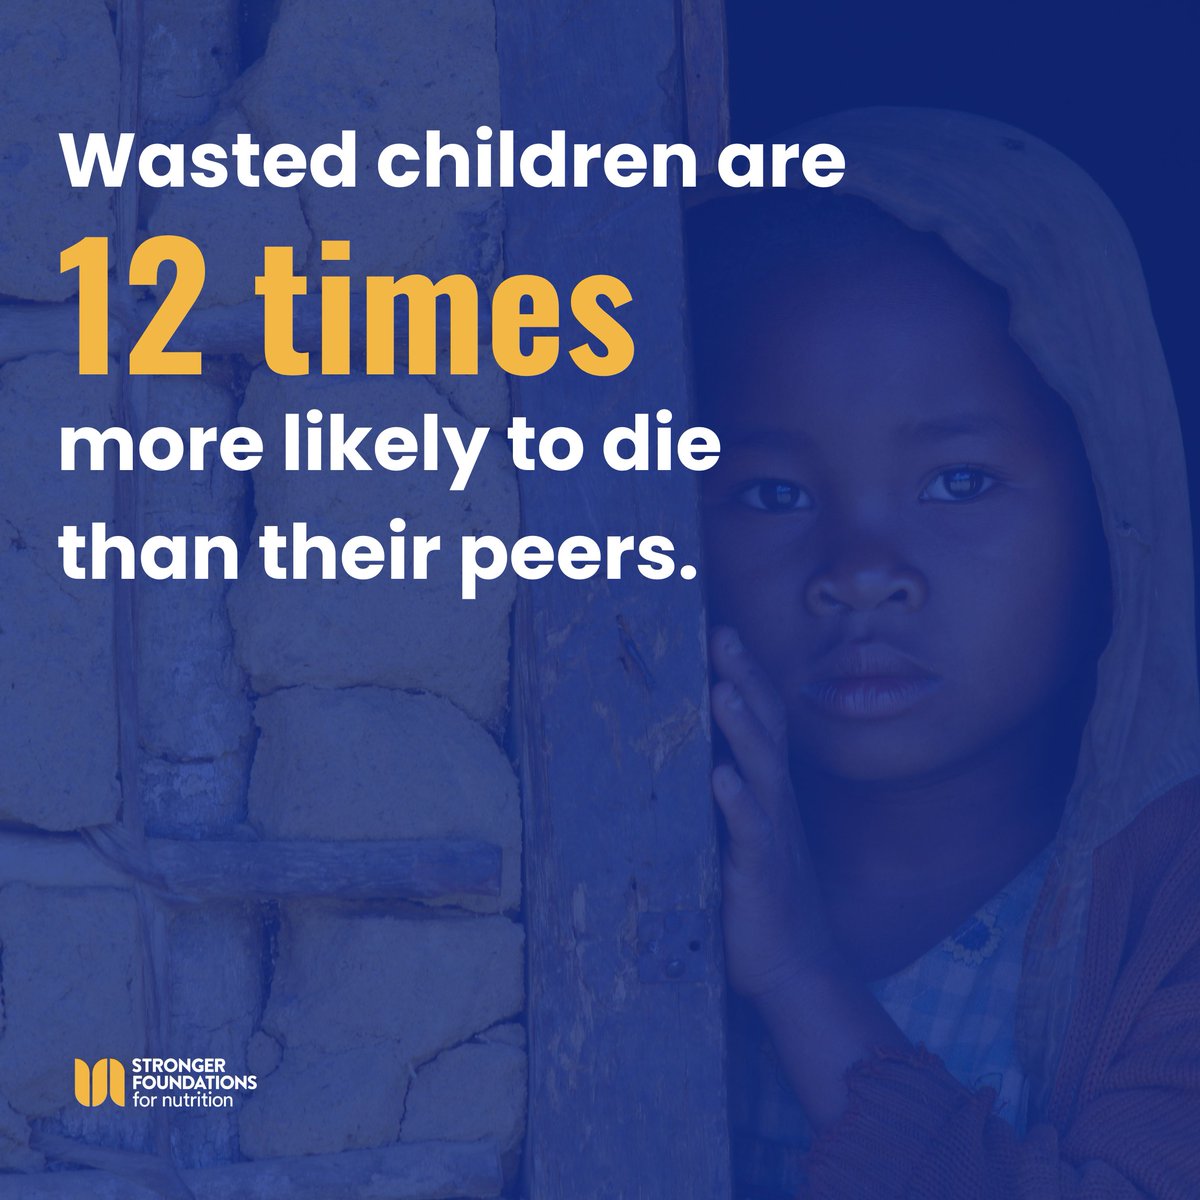 More than 1M children die of wasting each year. But this is entirely preventable as we have cost-effective & scalable solutions. Our Nutrition Intervention Map is an open-source database of dozens of nutrition interventions spanning health & food systems. bit.ly/SFN-interventi…